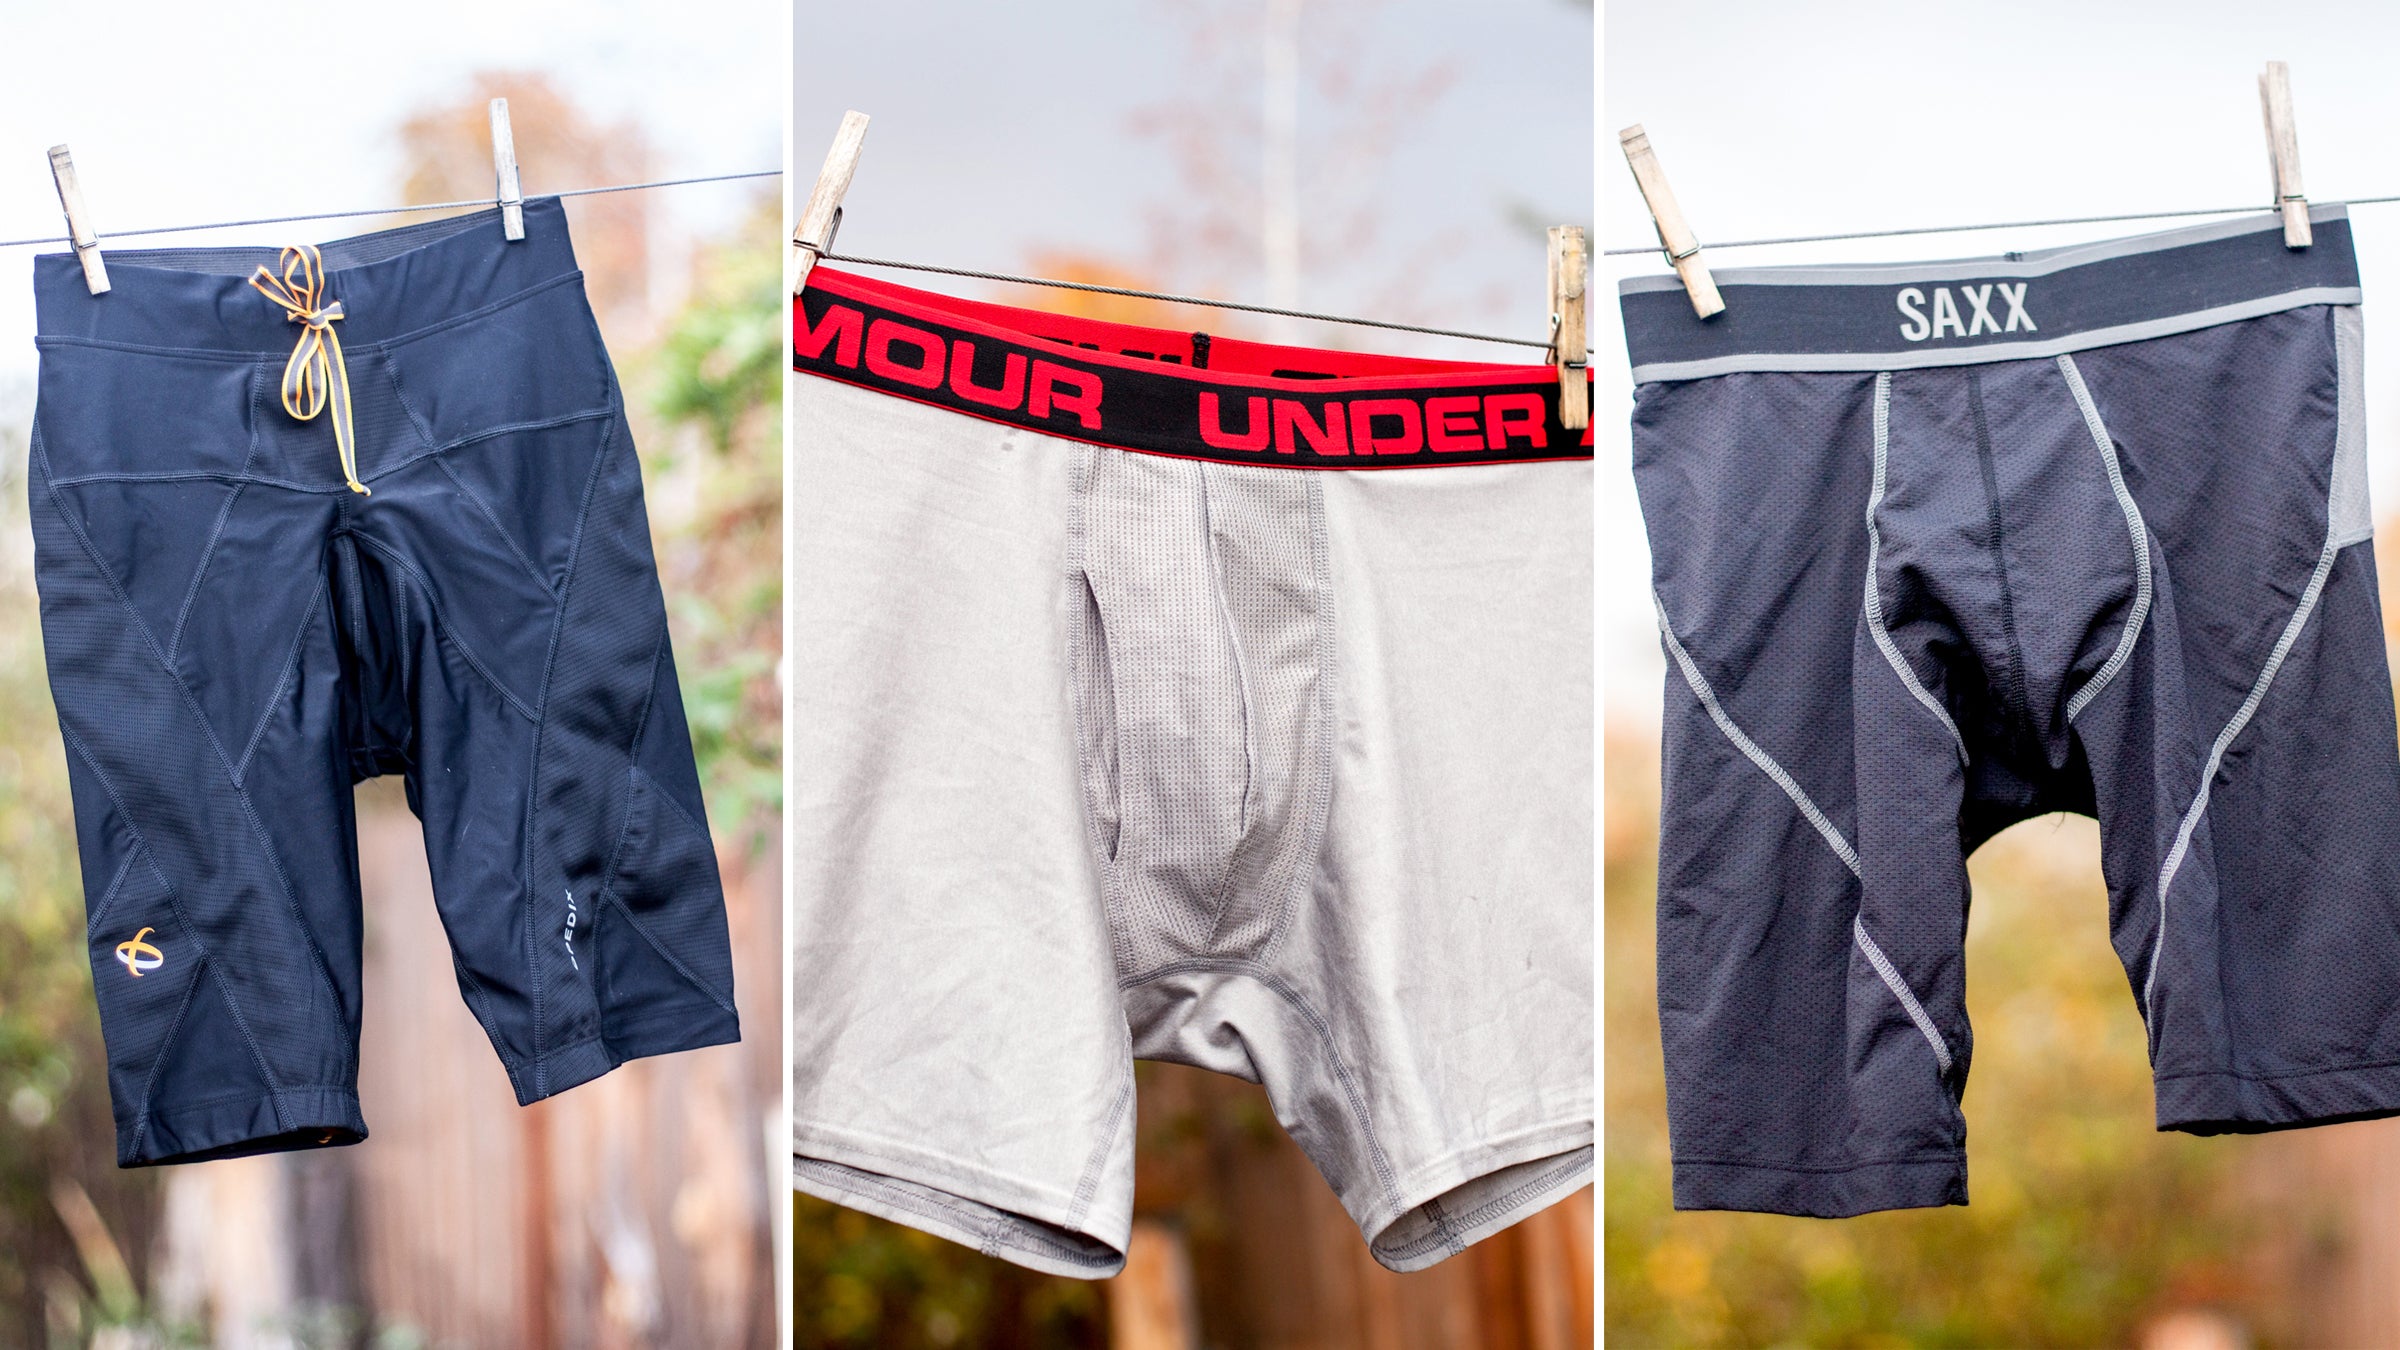 Merino Boxer Shorts are perfect for travel, outdoors and every day wear.